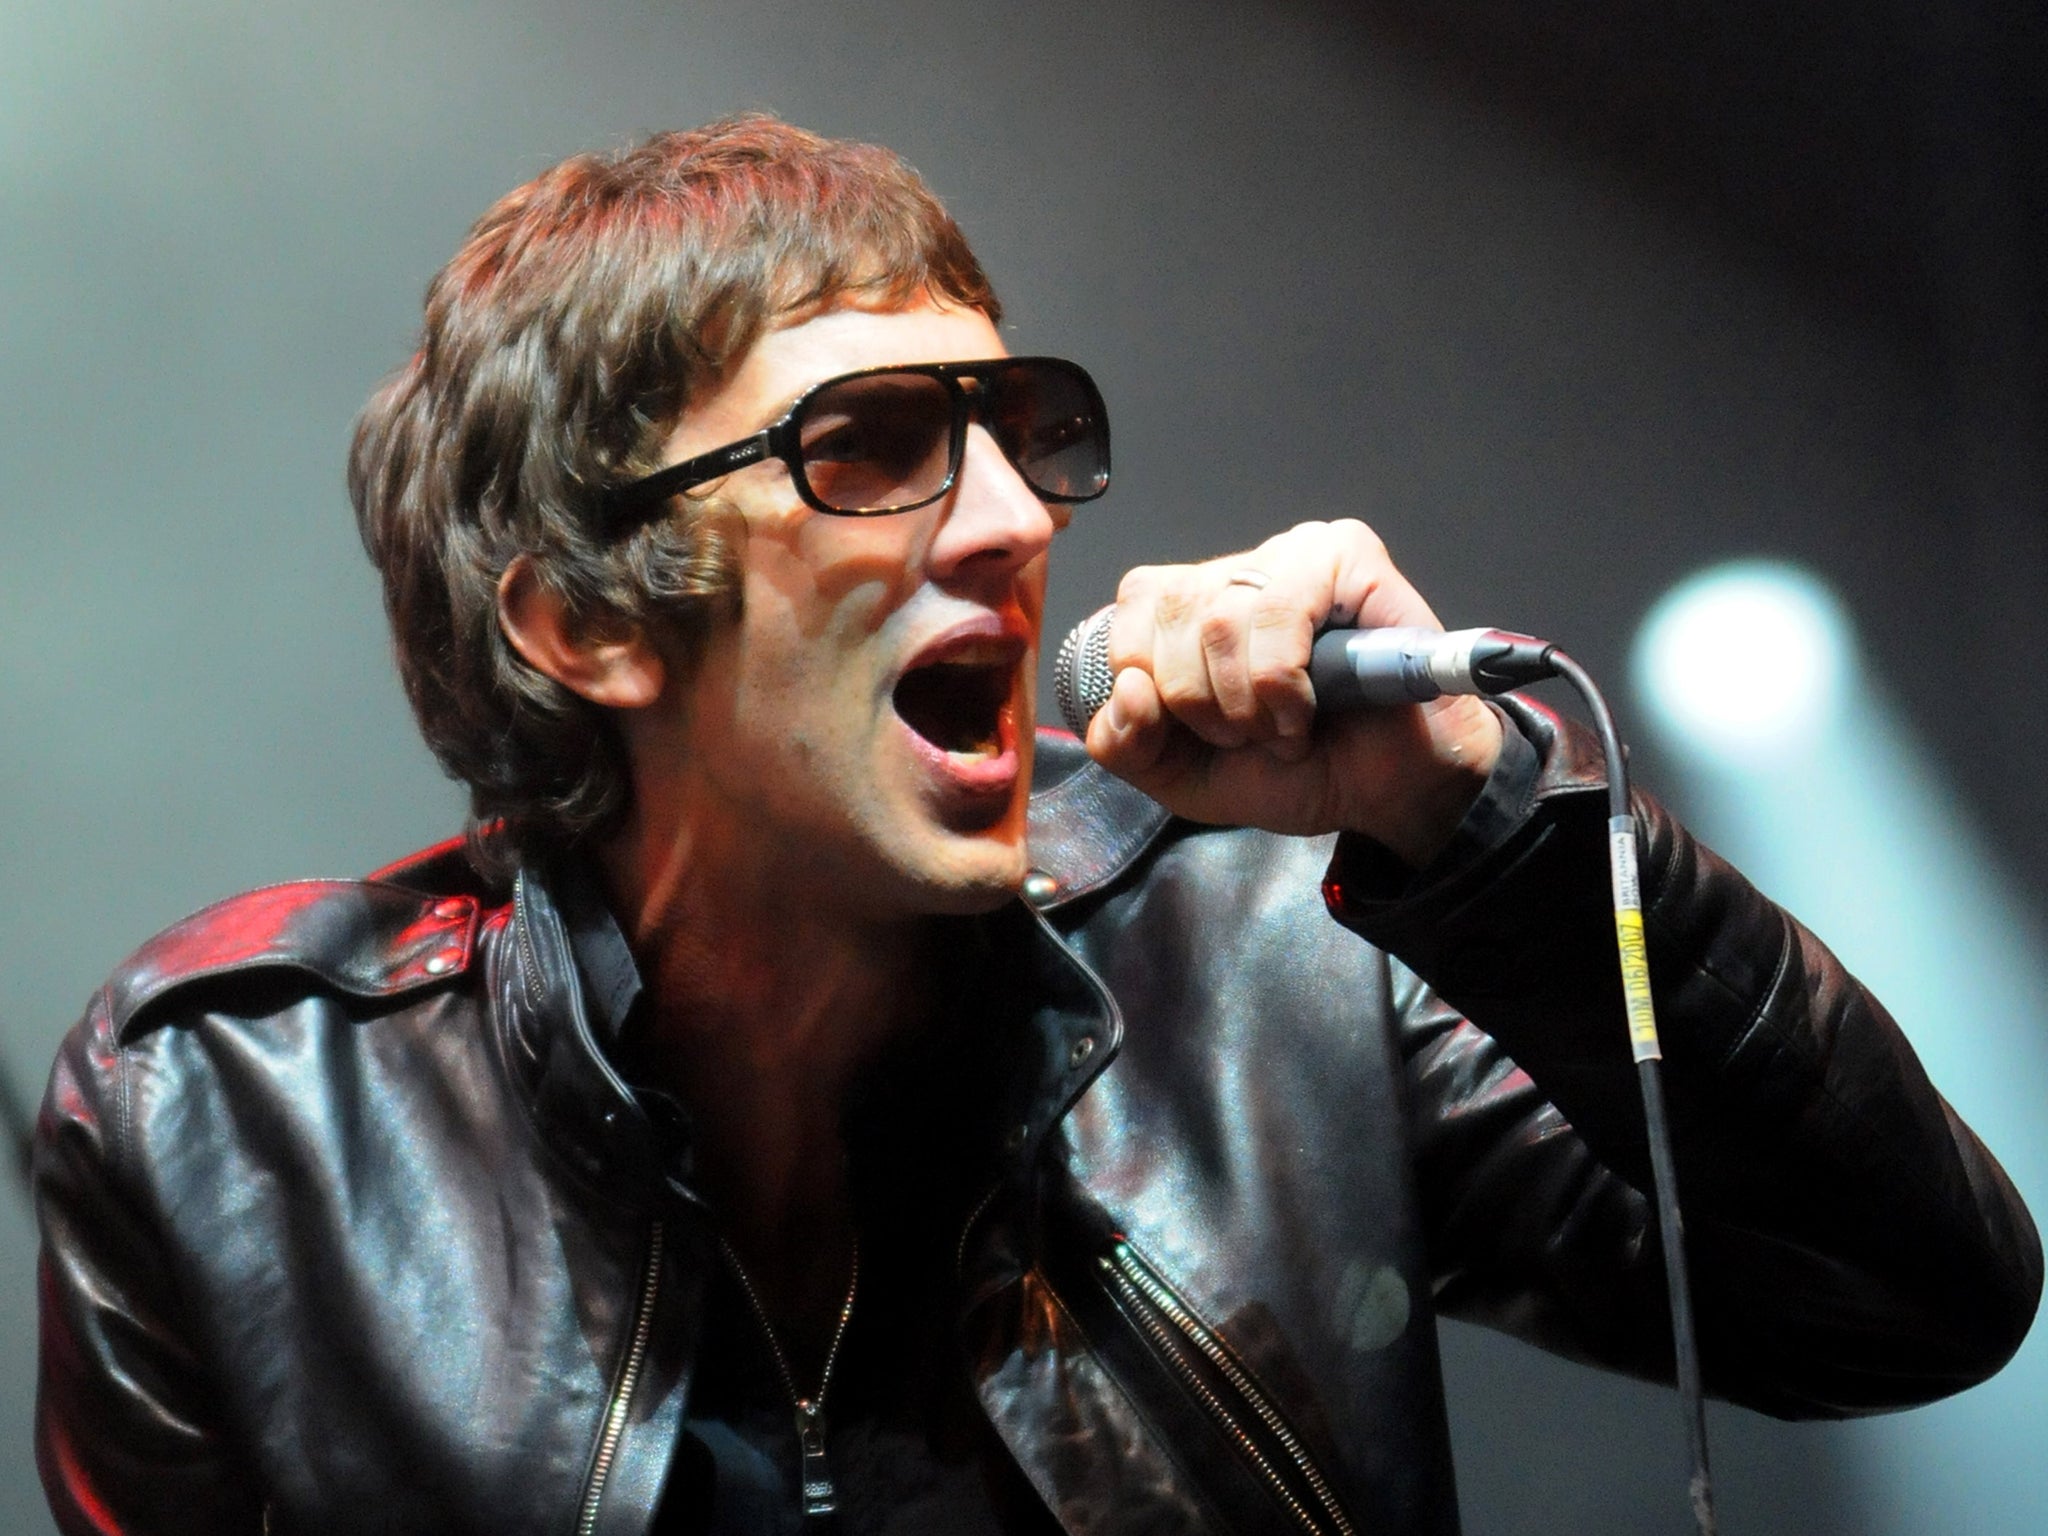 Richard Ashcroft fronting The Verve